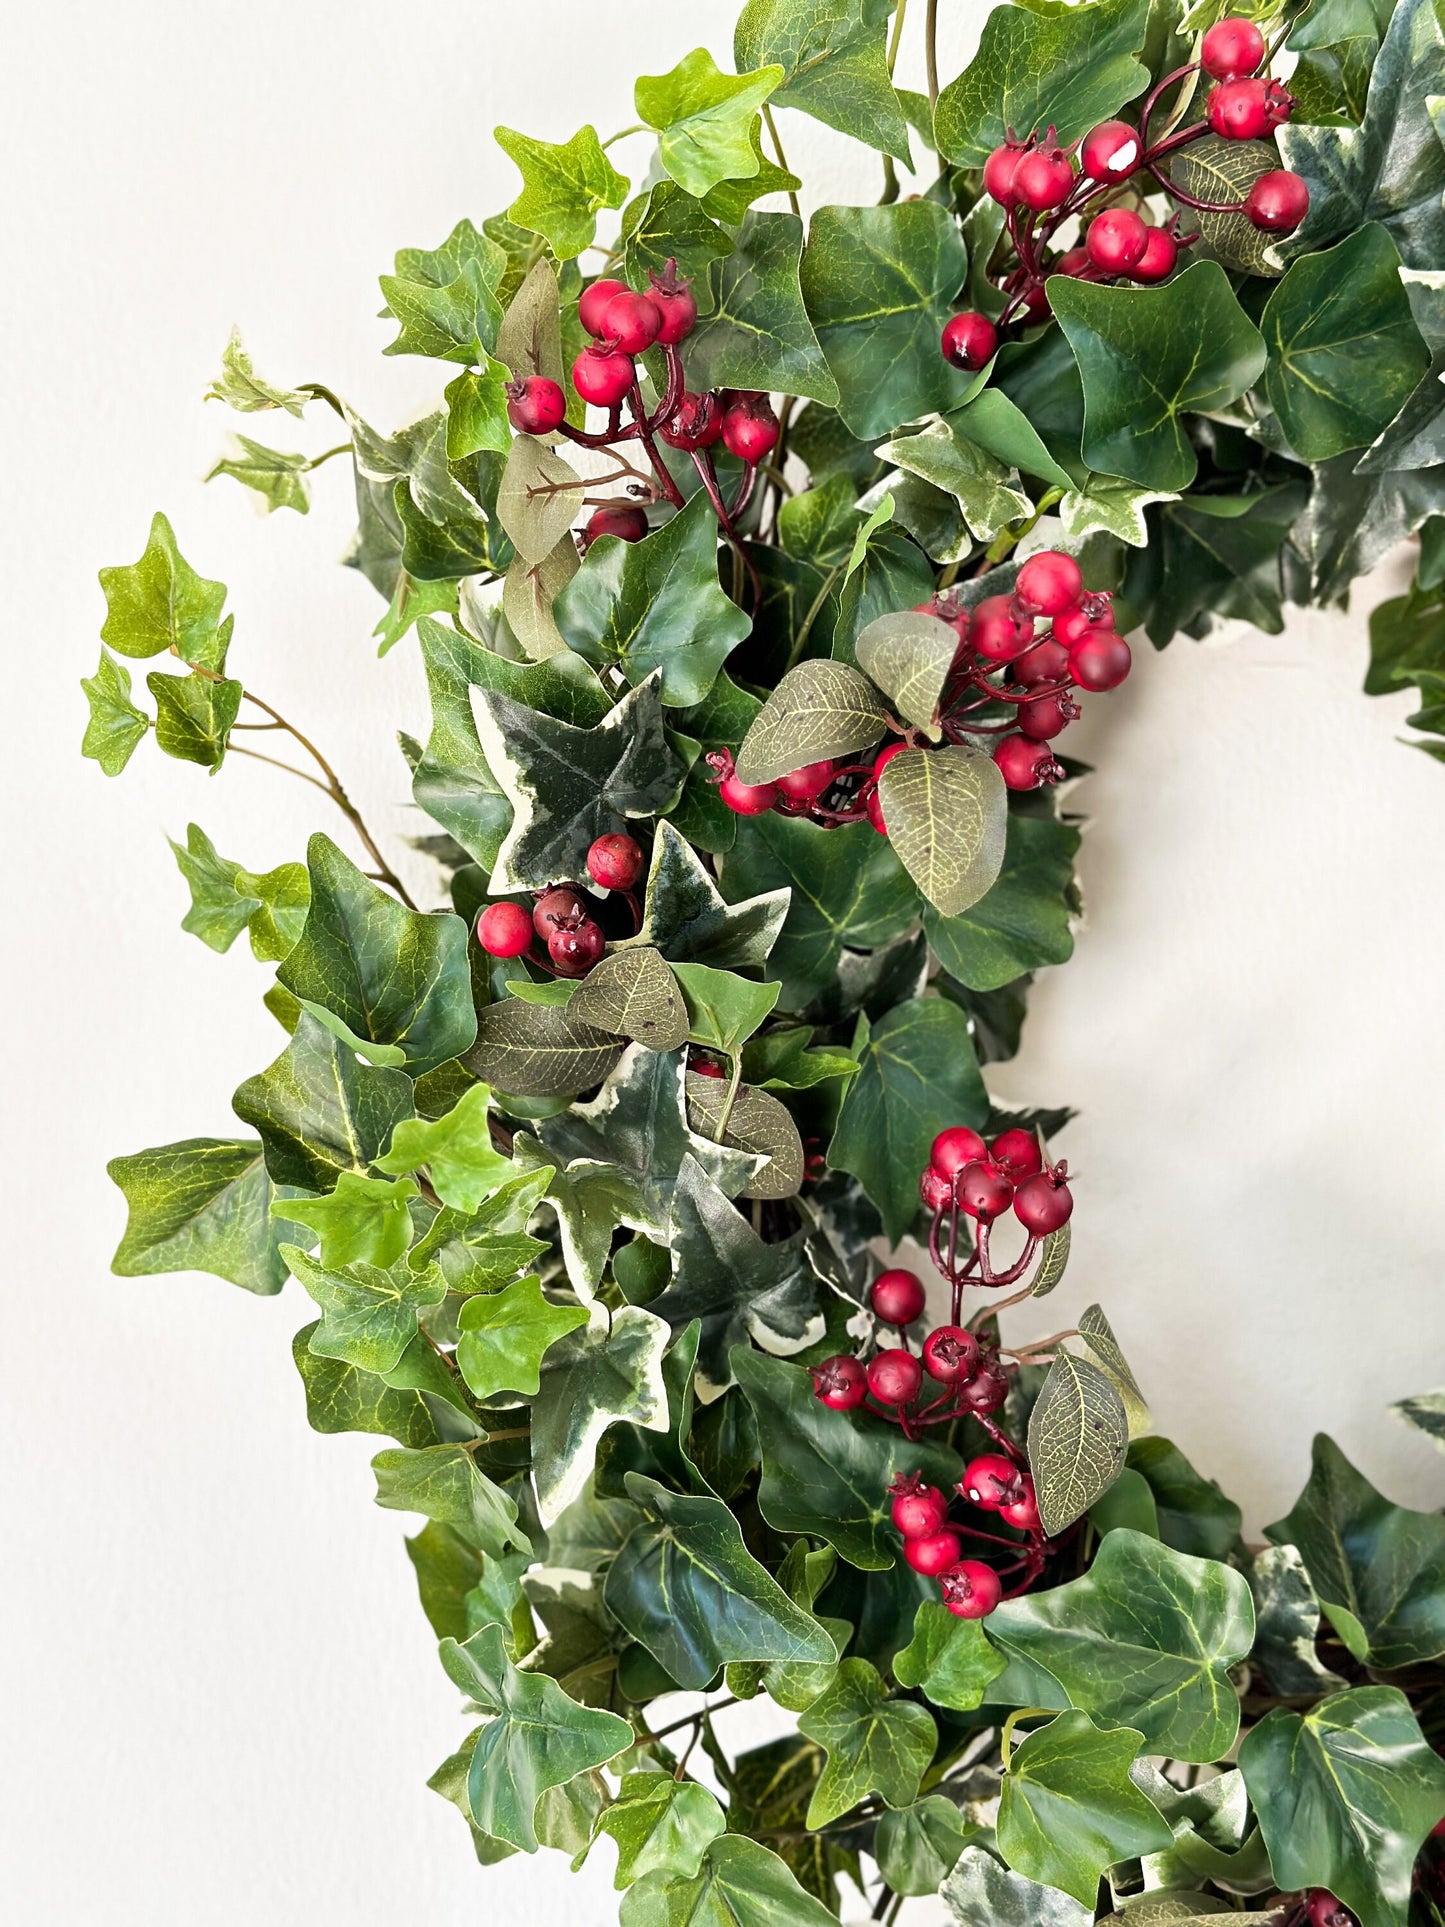 Classic Christmas Wreath w/ Ivy and Red Berries, Vintage Style Wreath for Front Door, Unique Seasonal Home Decor, Simple Holiday Wreath